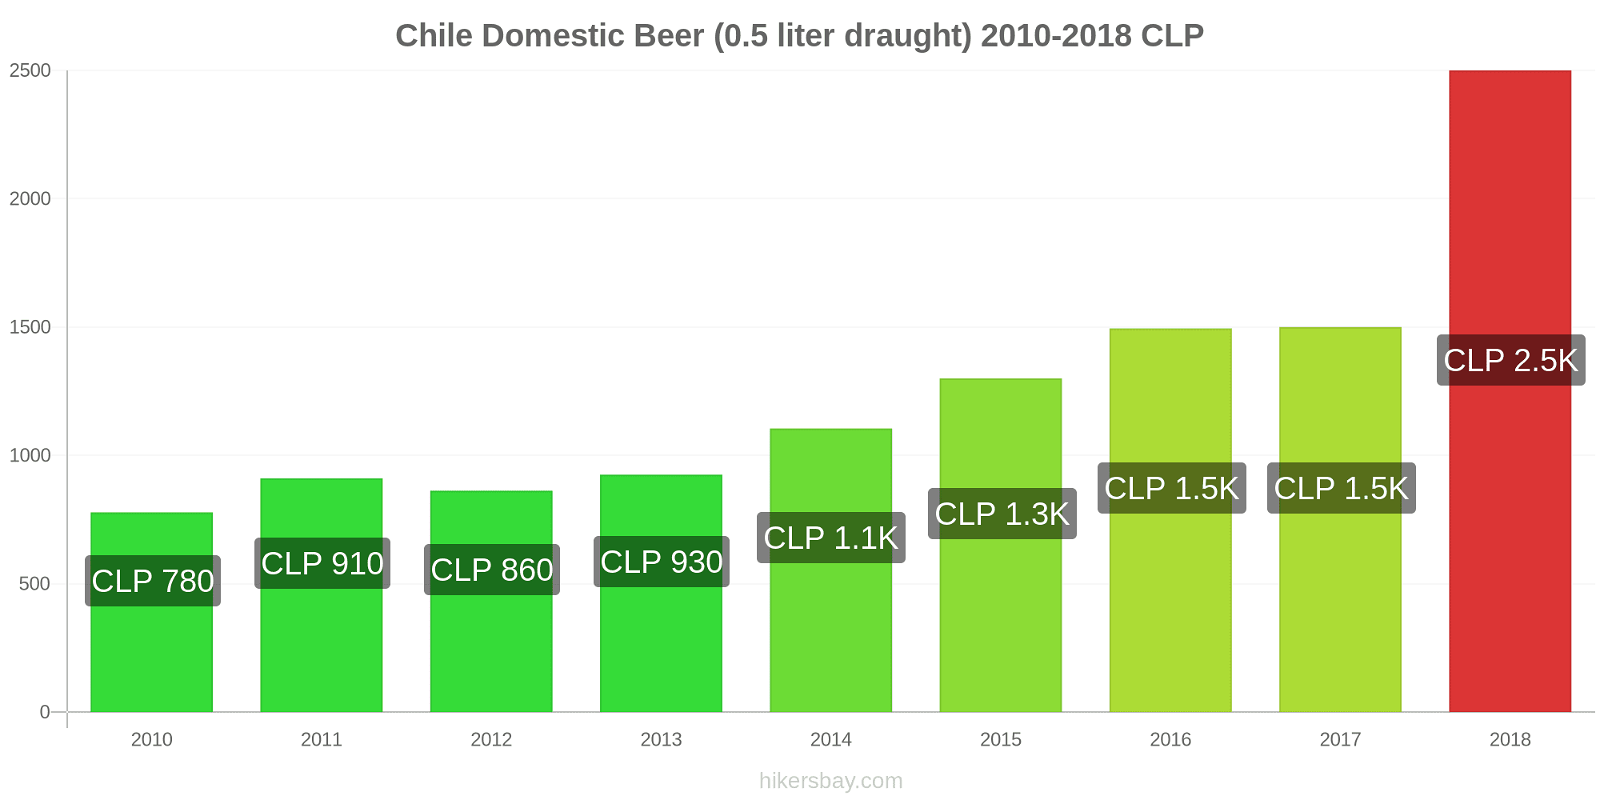 Chile price changes Domestic Beer (0.5 liter draught) hikersbay.com